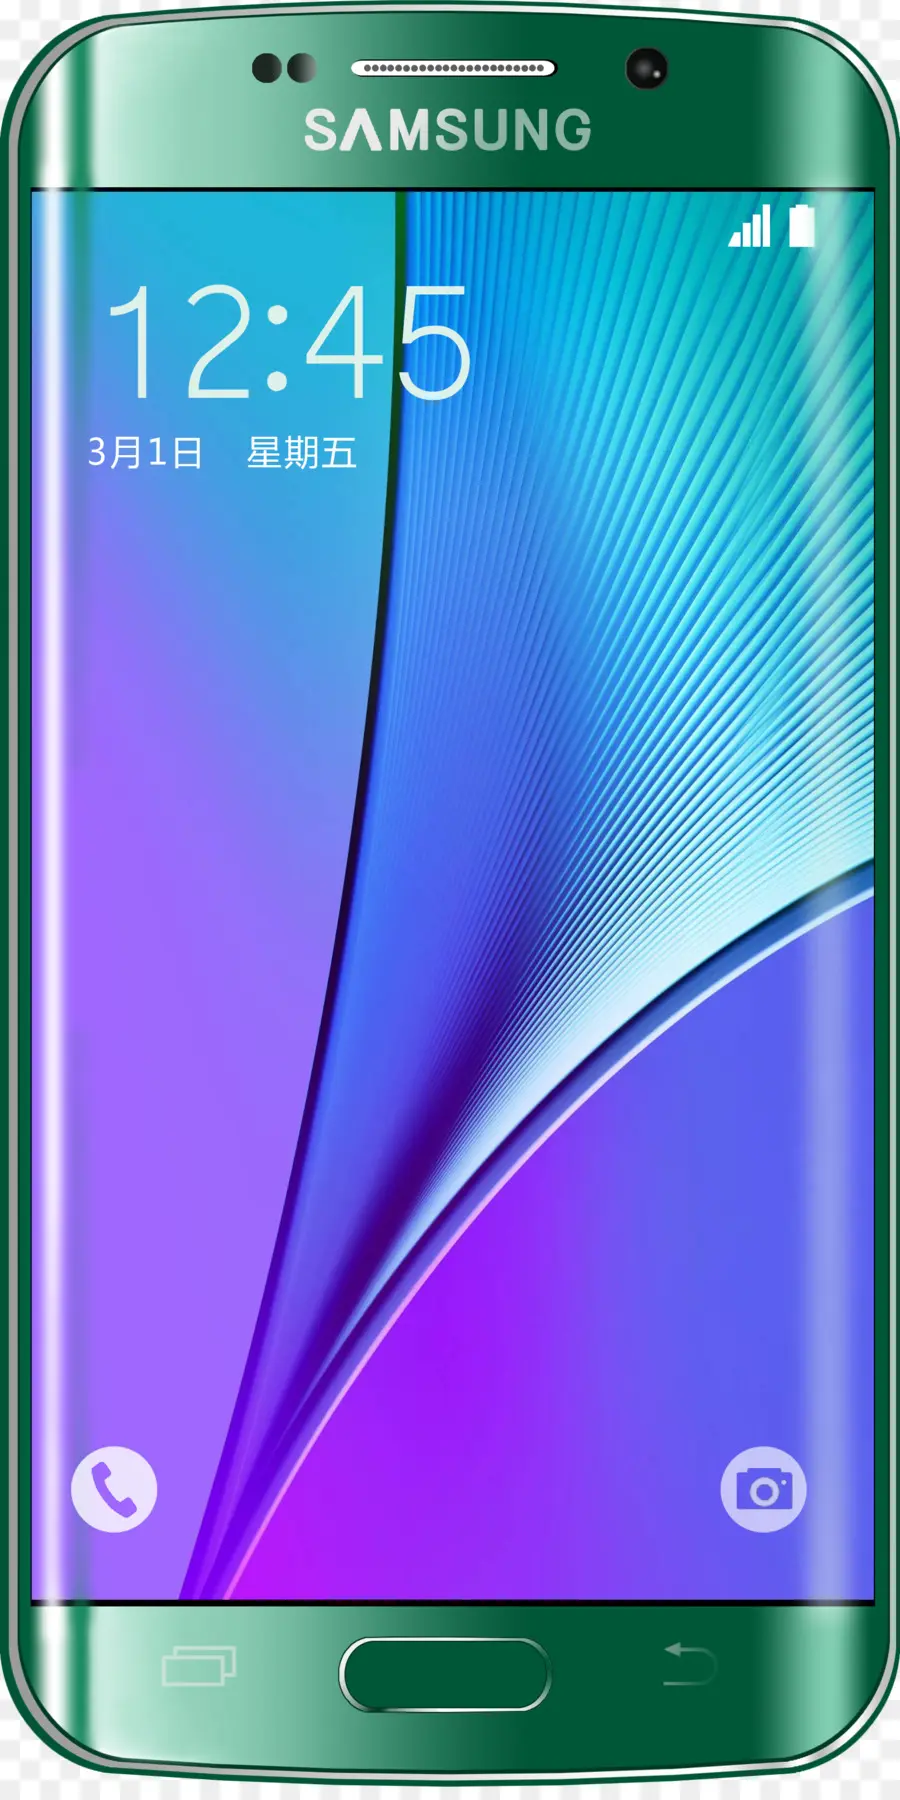 Iphone X，8 Iphone PNG